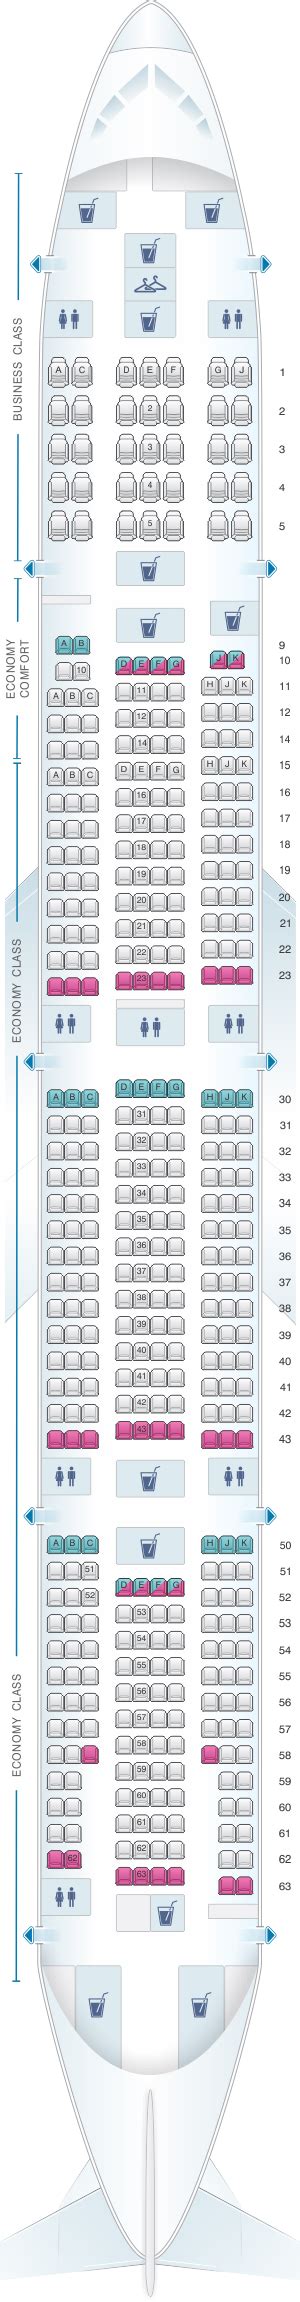 Seat map klm boeing 777 300er. Things To Know About Seat map klm boeing 777 300er. 